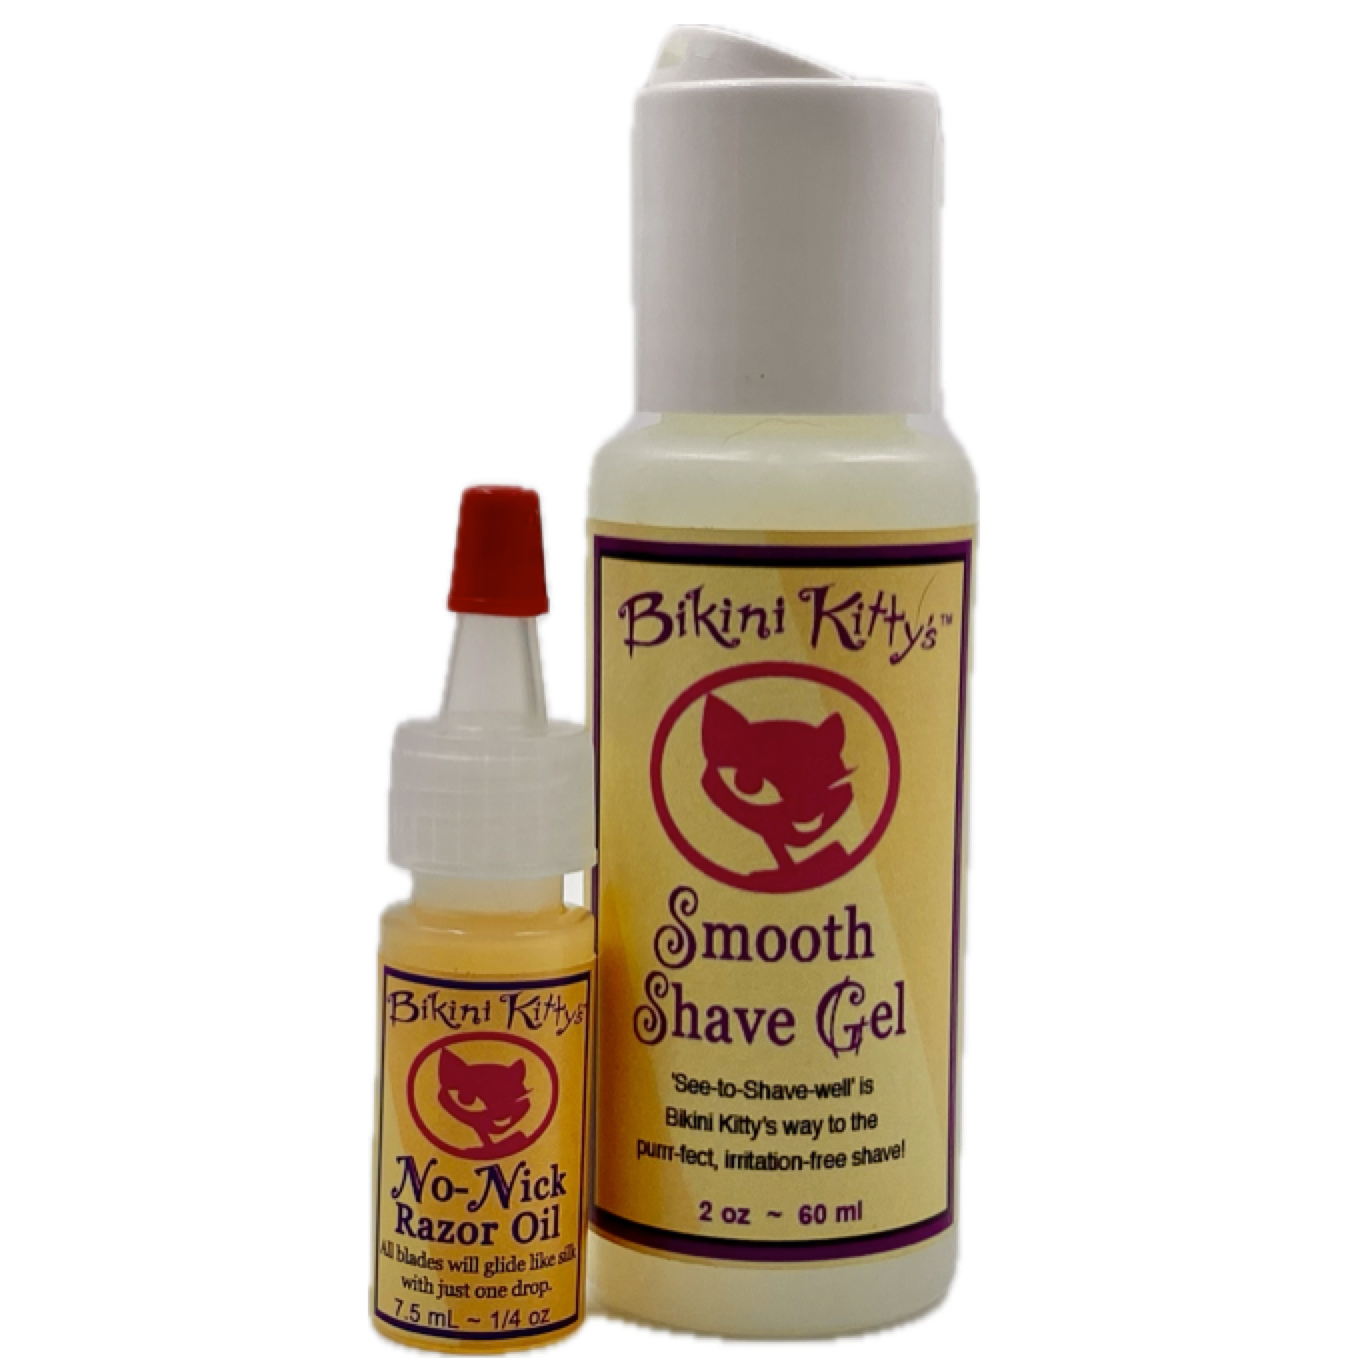 Travel Size: Replenish Shave Gel and Blade Oil